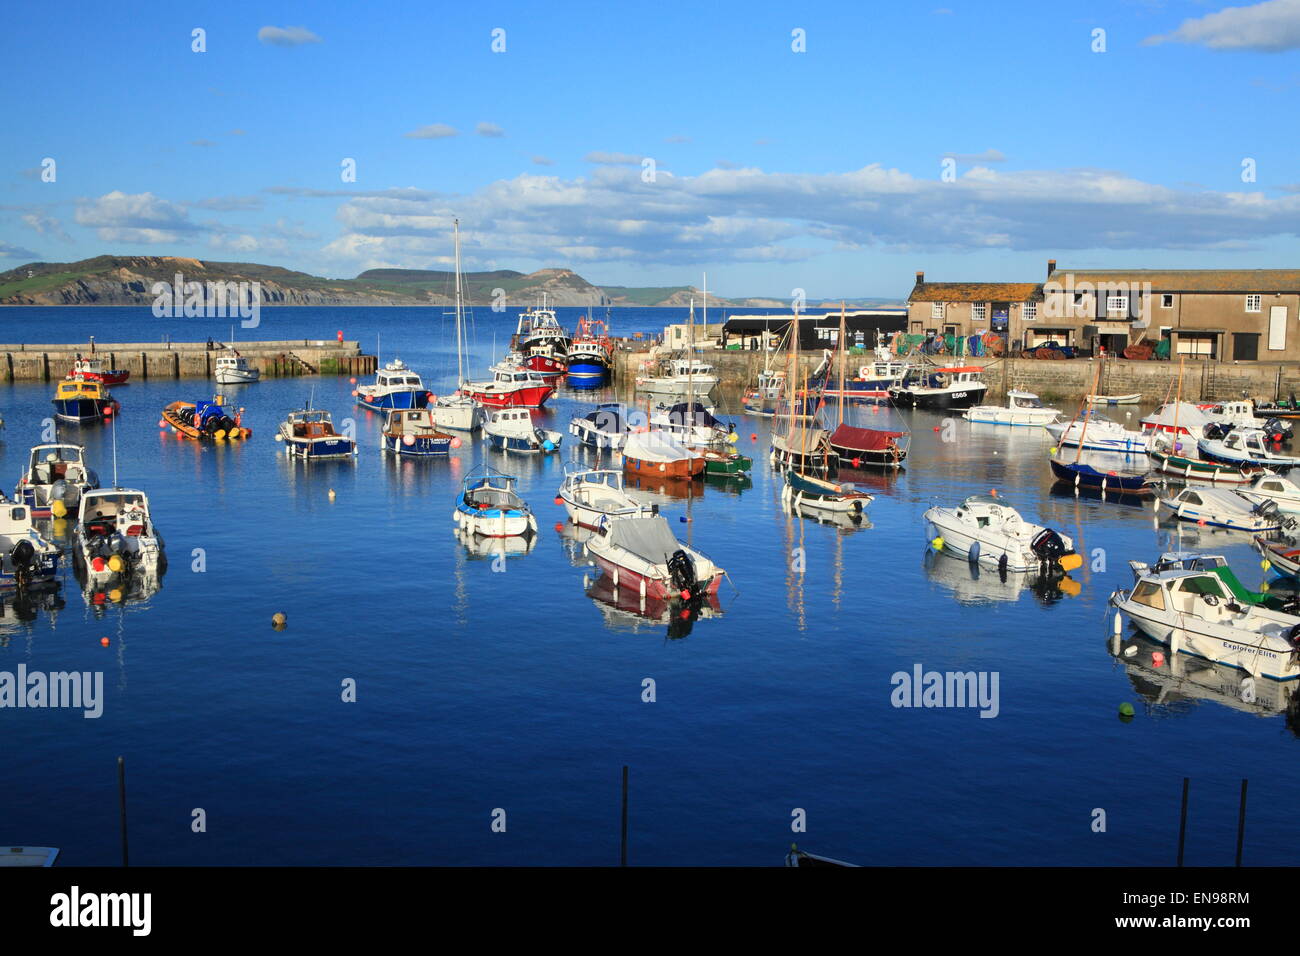 Lyme Regis harbour view looking towards Charmouth, Dorset, England, UK Stock Photo